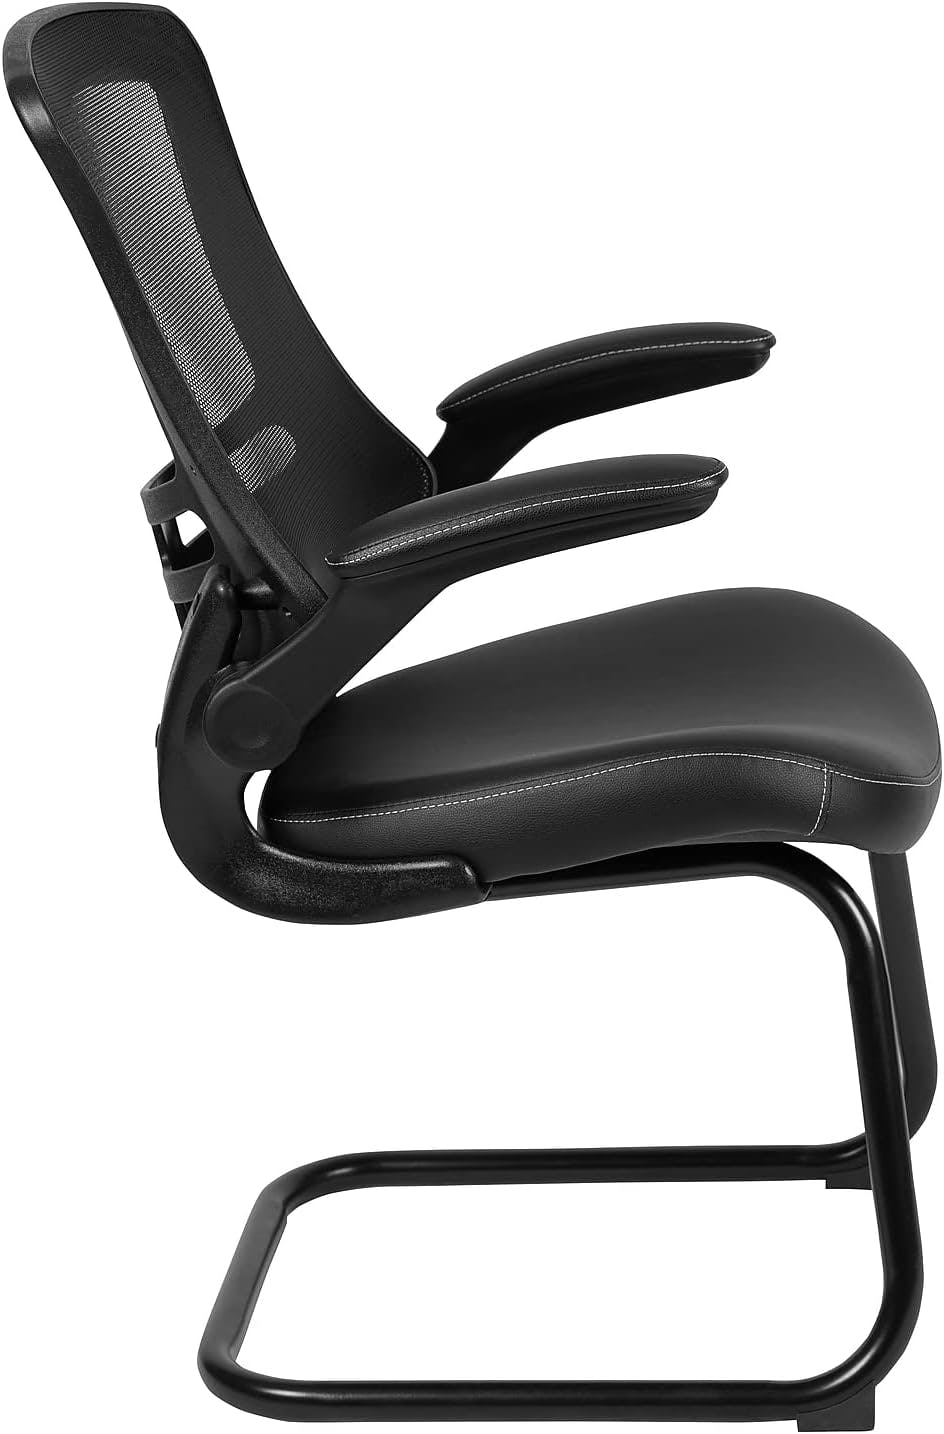 Kelista High-Back Black LeatherSoft Mesh Office Guest Chair